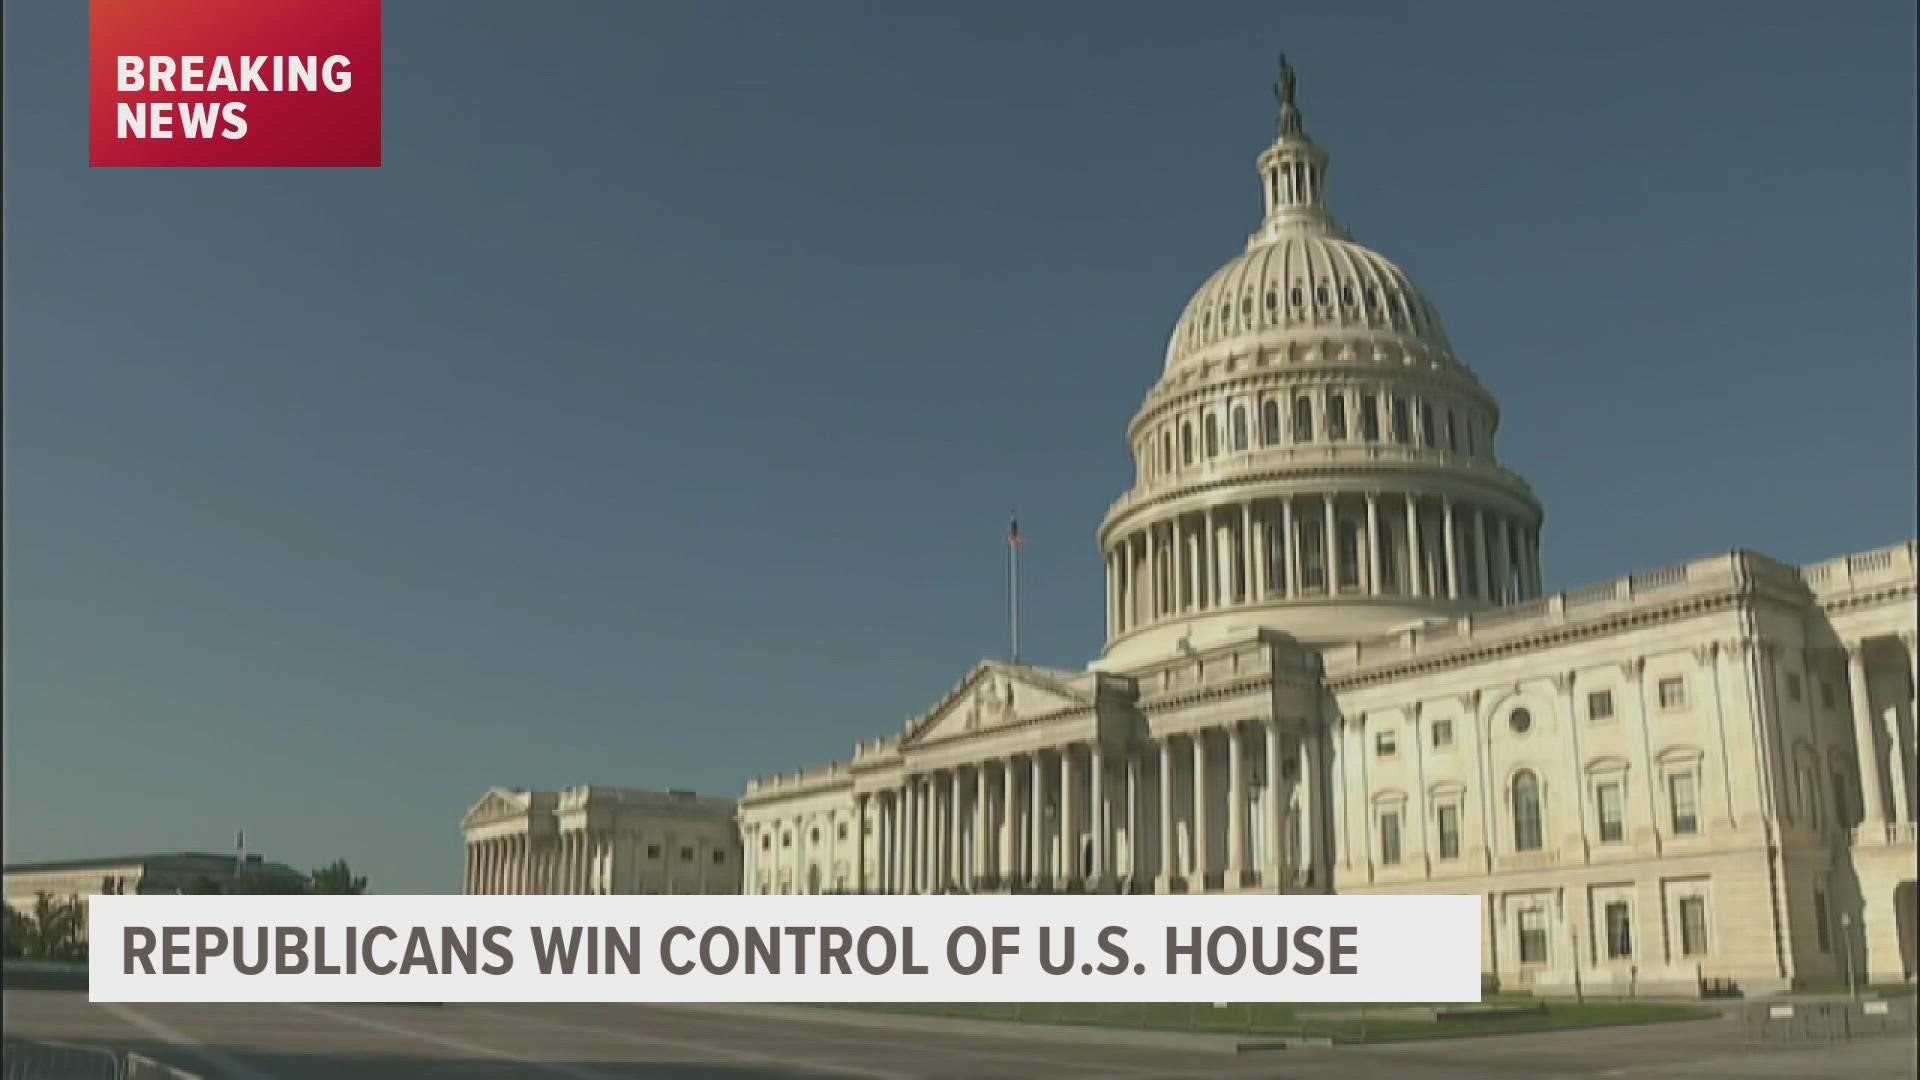 More than a week after Election Day, Republicans secured the 218th seat needed to flip the House from Democratic control.